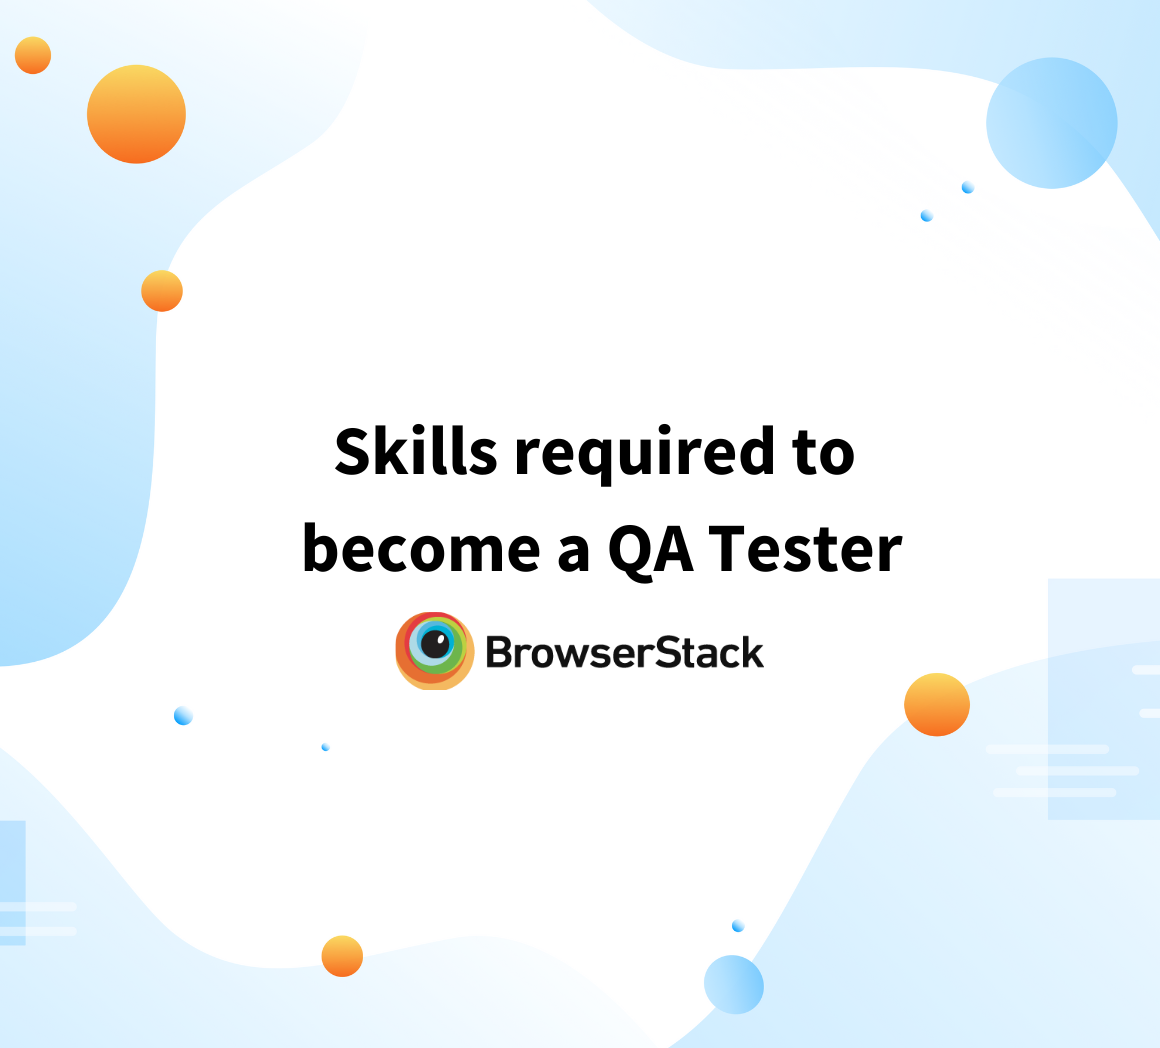 Skills required to become a QA Tester